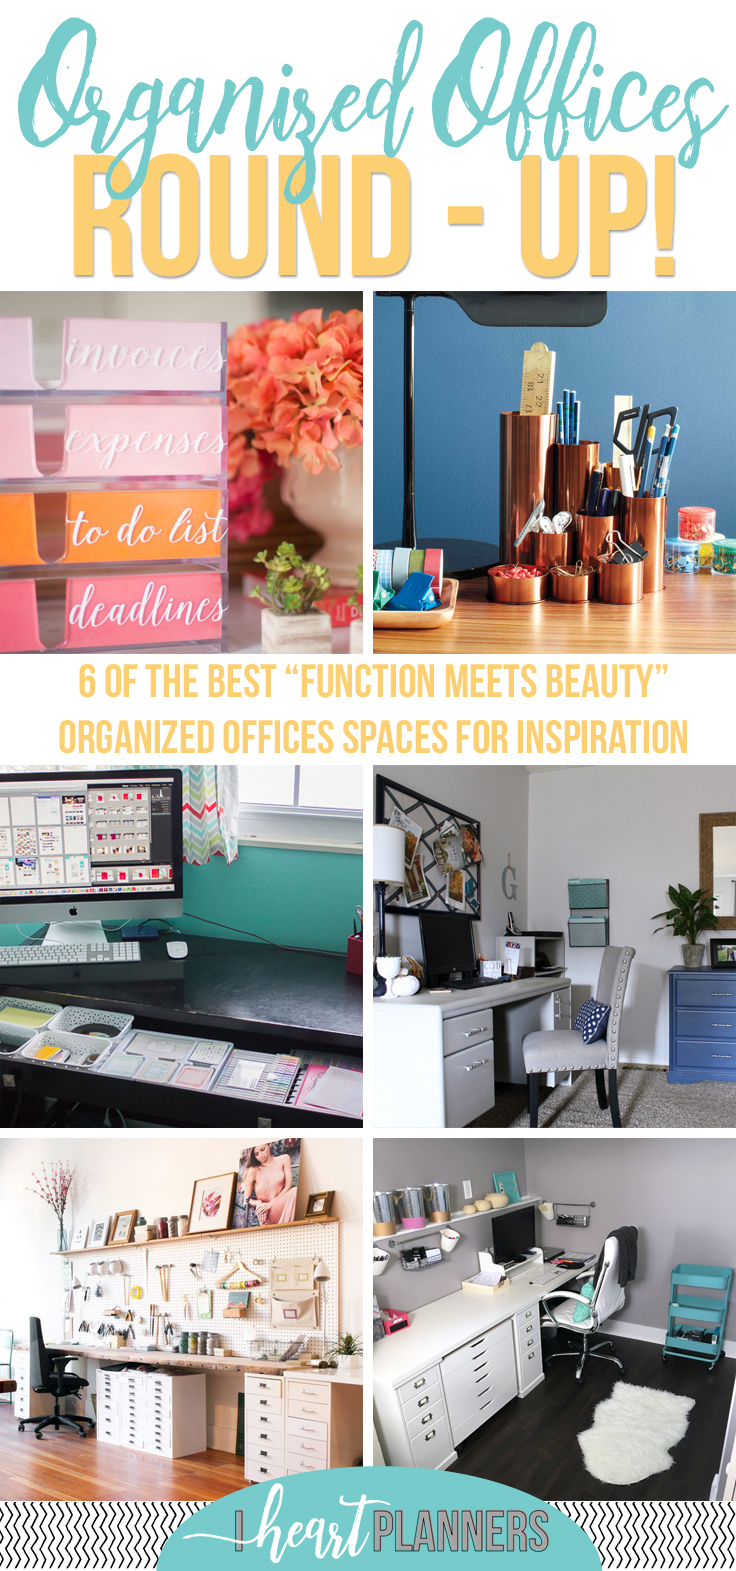 6 of the best "function meets beauty" organized office spaces for inspiration. - iheartplanners.com